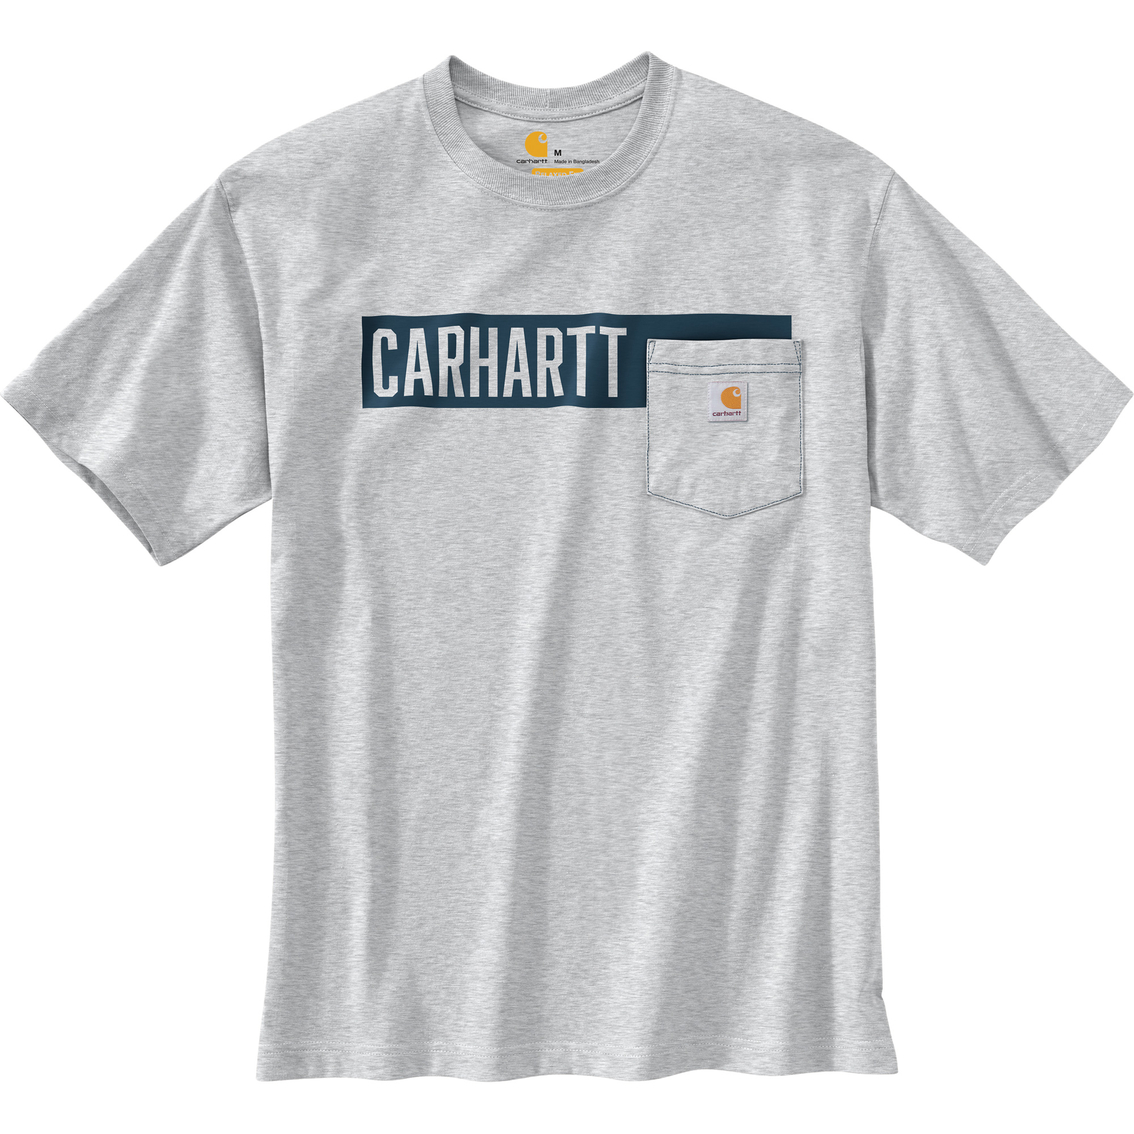 Carhartt Relaxed Fit Graphic Tee | T-shirts | Clothing | Shop The Exchange